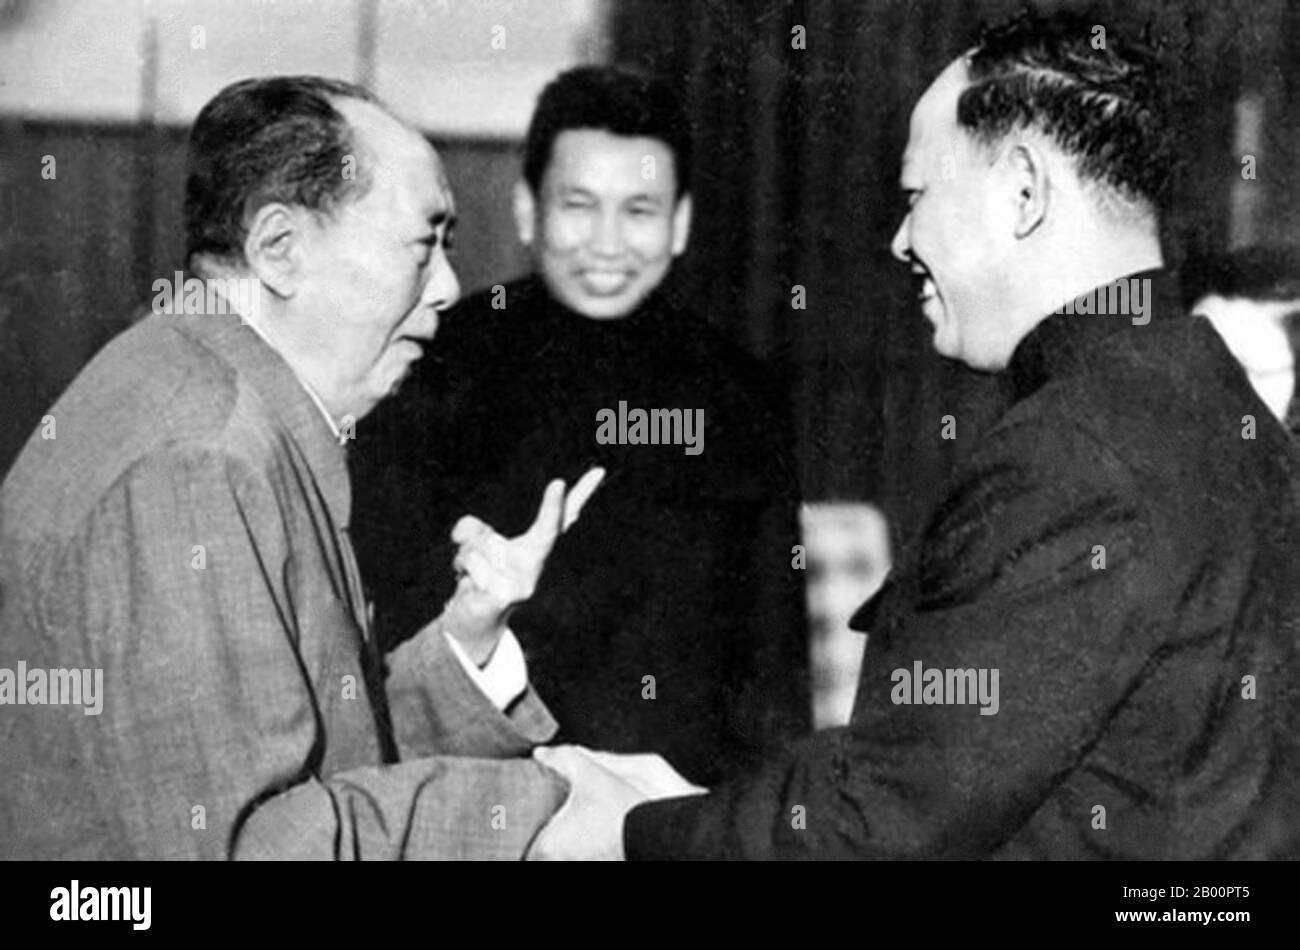 Cambodia: Khmer Rouge leaders Pol Pot and Ieng Sary meet Chairman Mao Zedong, Beijing, 1976. Mao, who looks somewhat senile but enthusiastically supported the Khmer Rouge revolution, died on September 9, 1976. Stock Photo